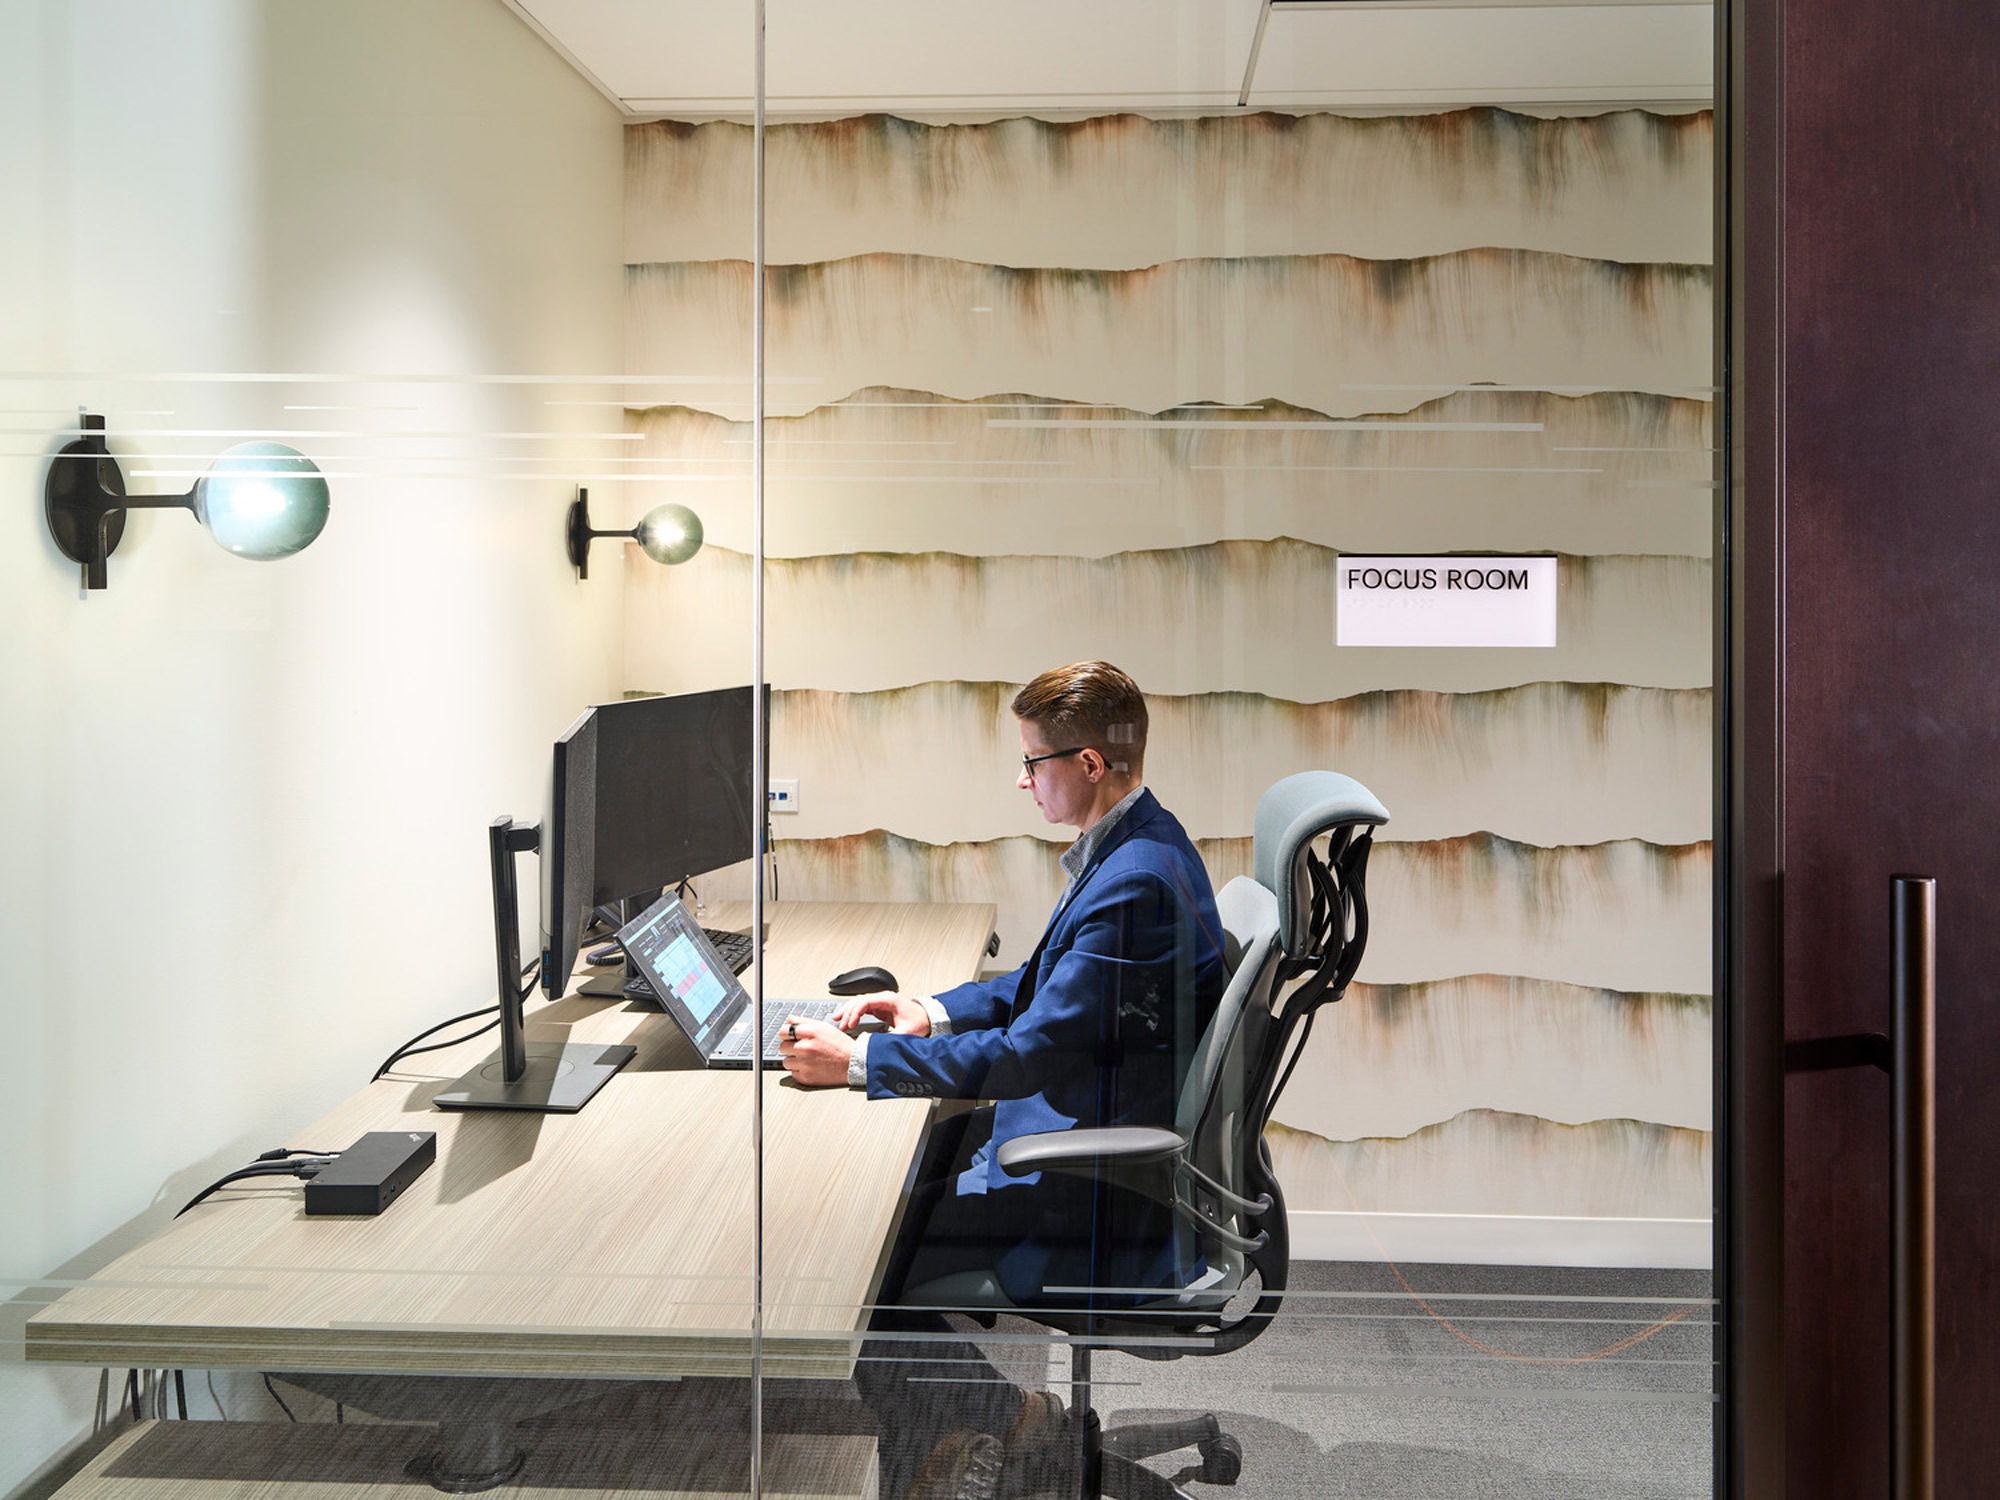 Professional focus room interior featuring a textured, wave-like wall panel in a creamy palette, modern wood-grain desk, ergonomic black chair, and glass partition, complemented by ambient lighting fixtures.